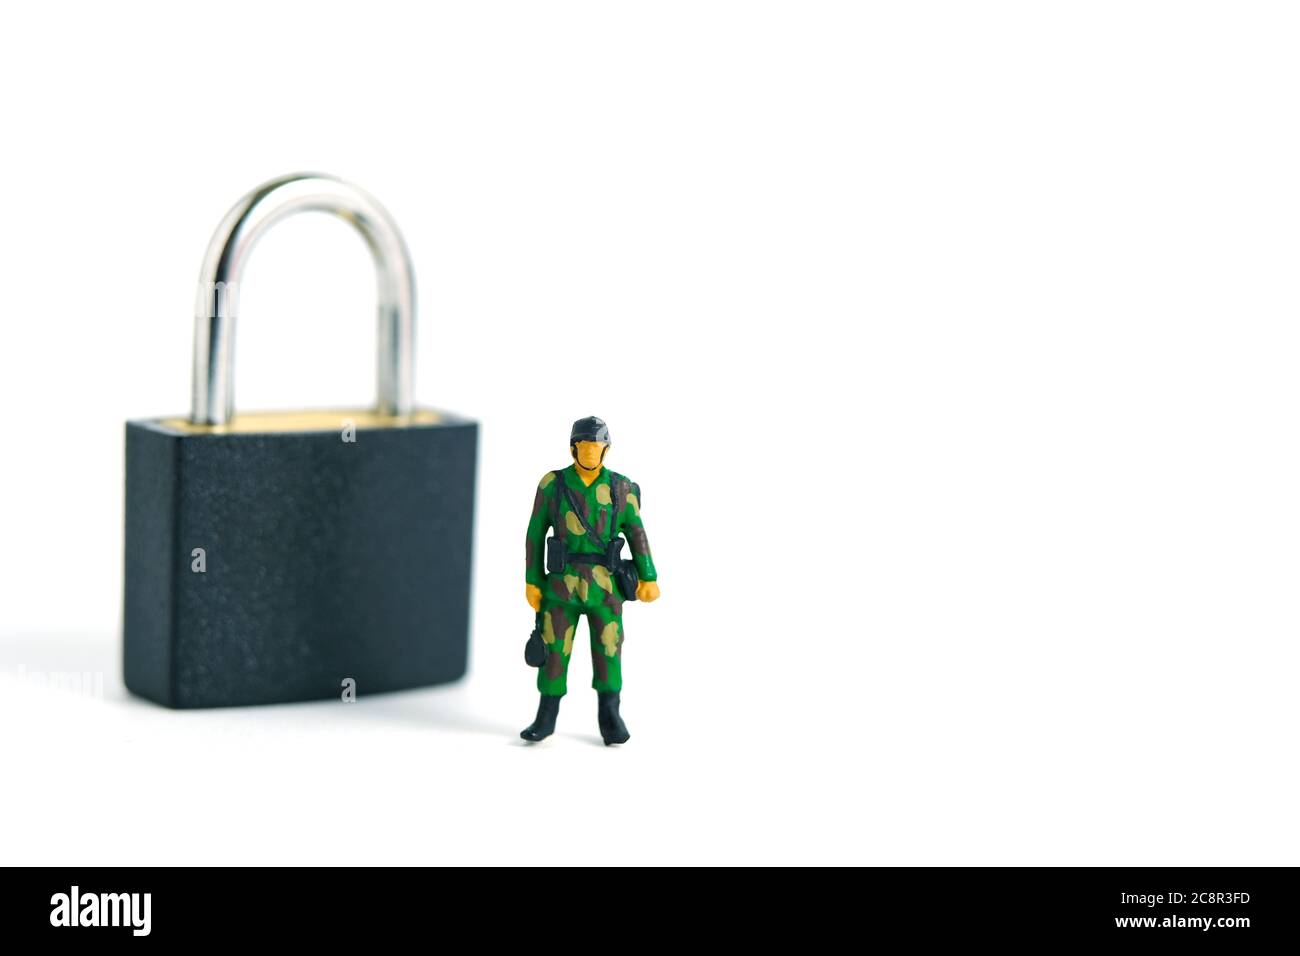 Pandemic coronavirus conceptual miniature people photography – Lockdown illustration – miniature soldier stand guard in front of padlock. Image Photo Stock Photo